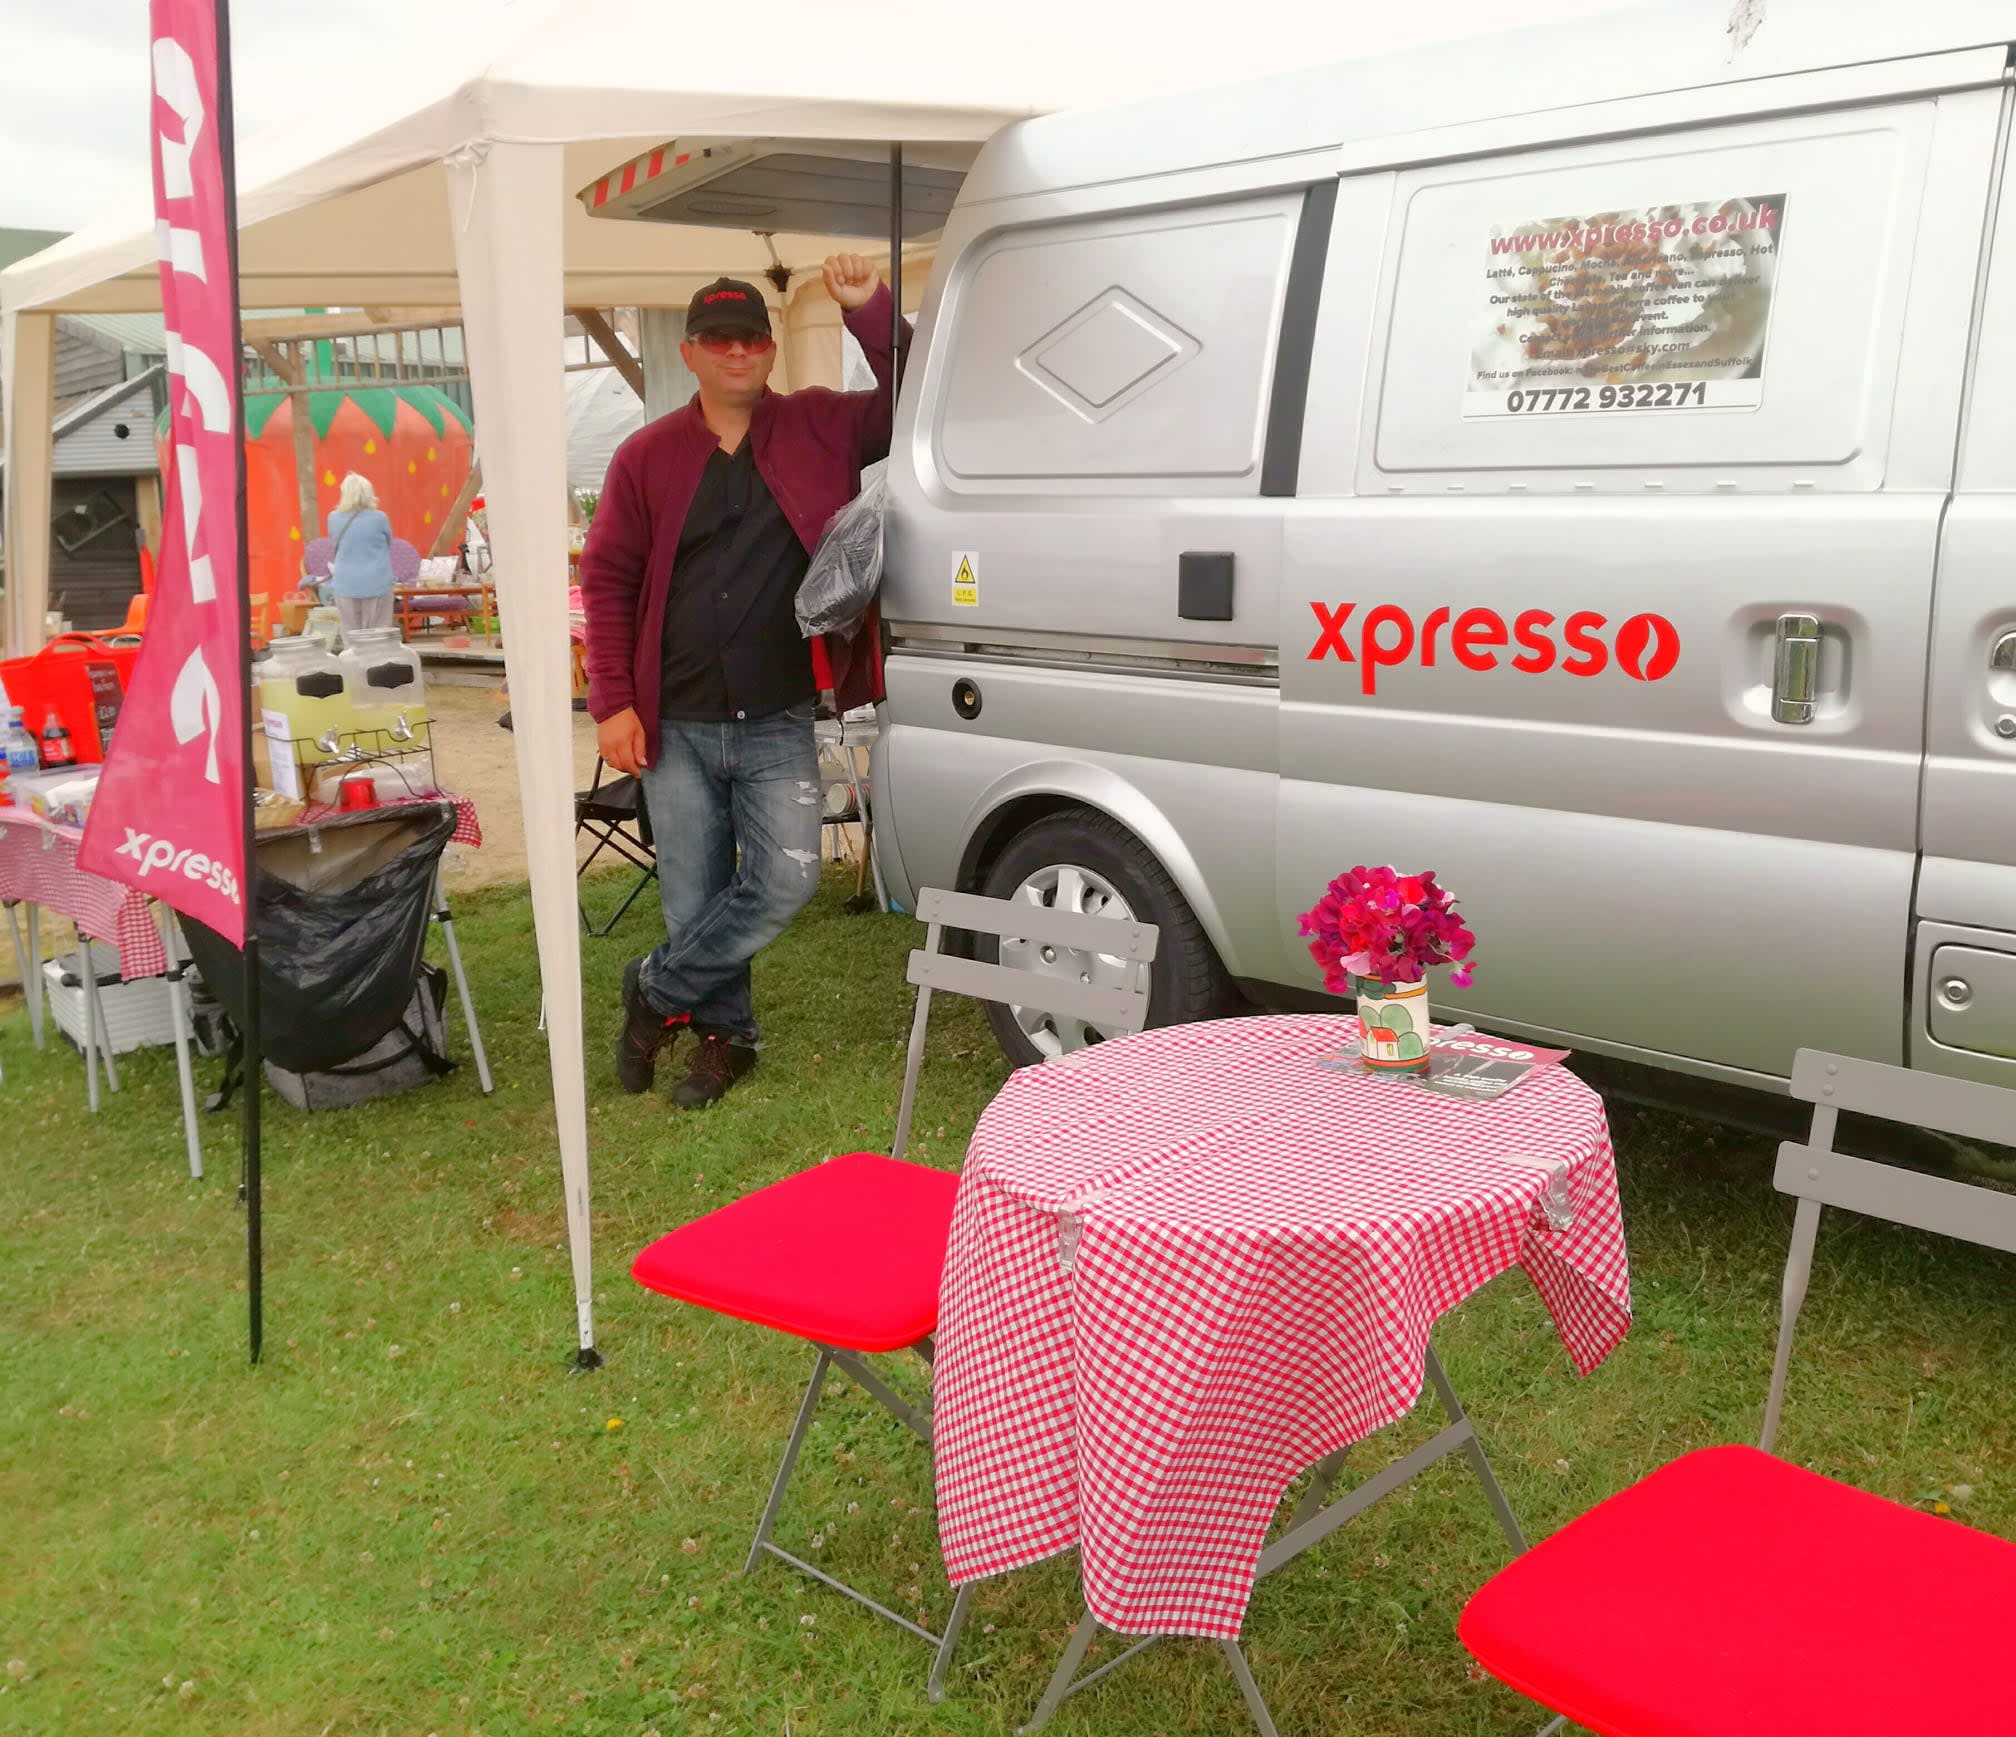 Images Xpresso - Mobile Coffee Caterer